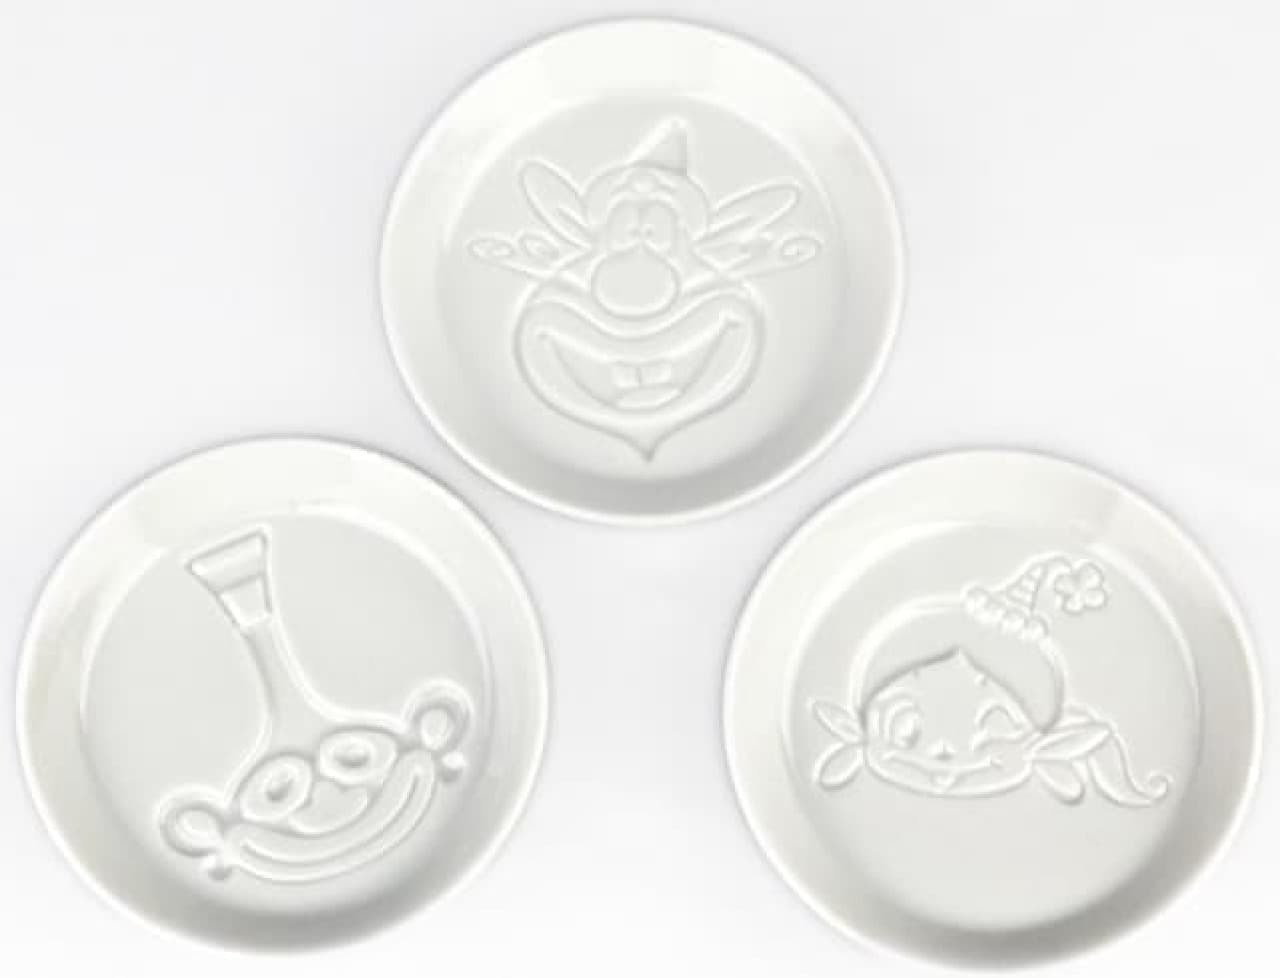 A soy sauce dish with the "The Genie Family" design